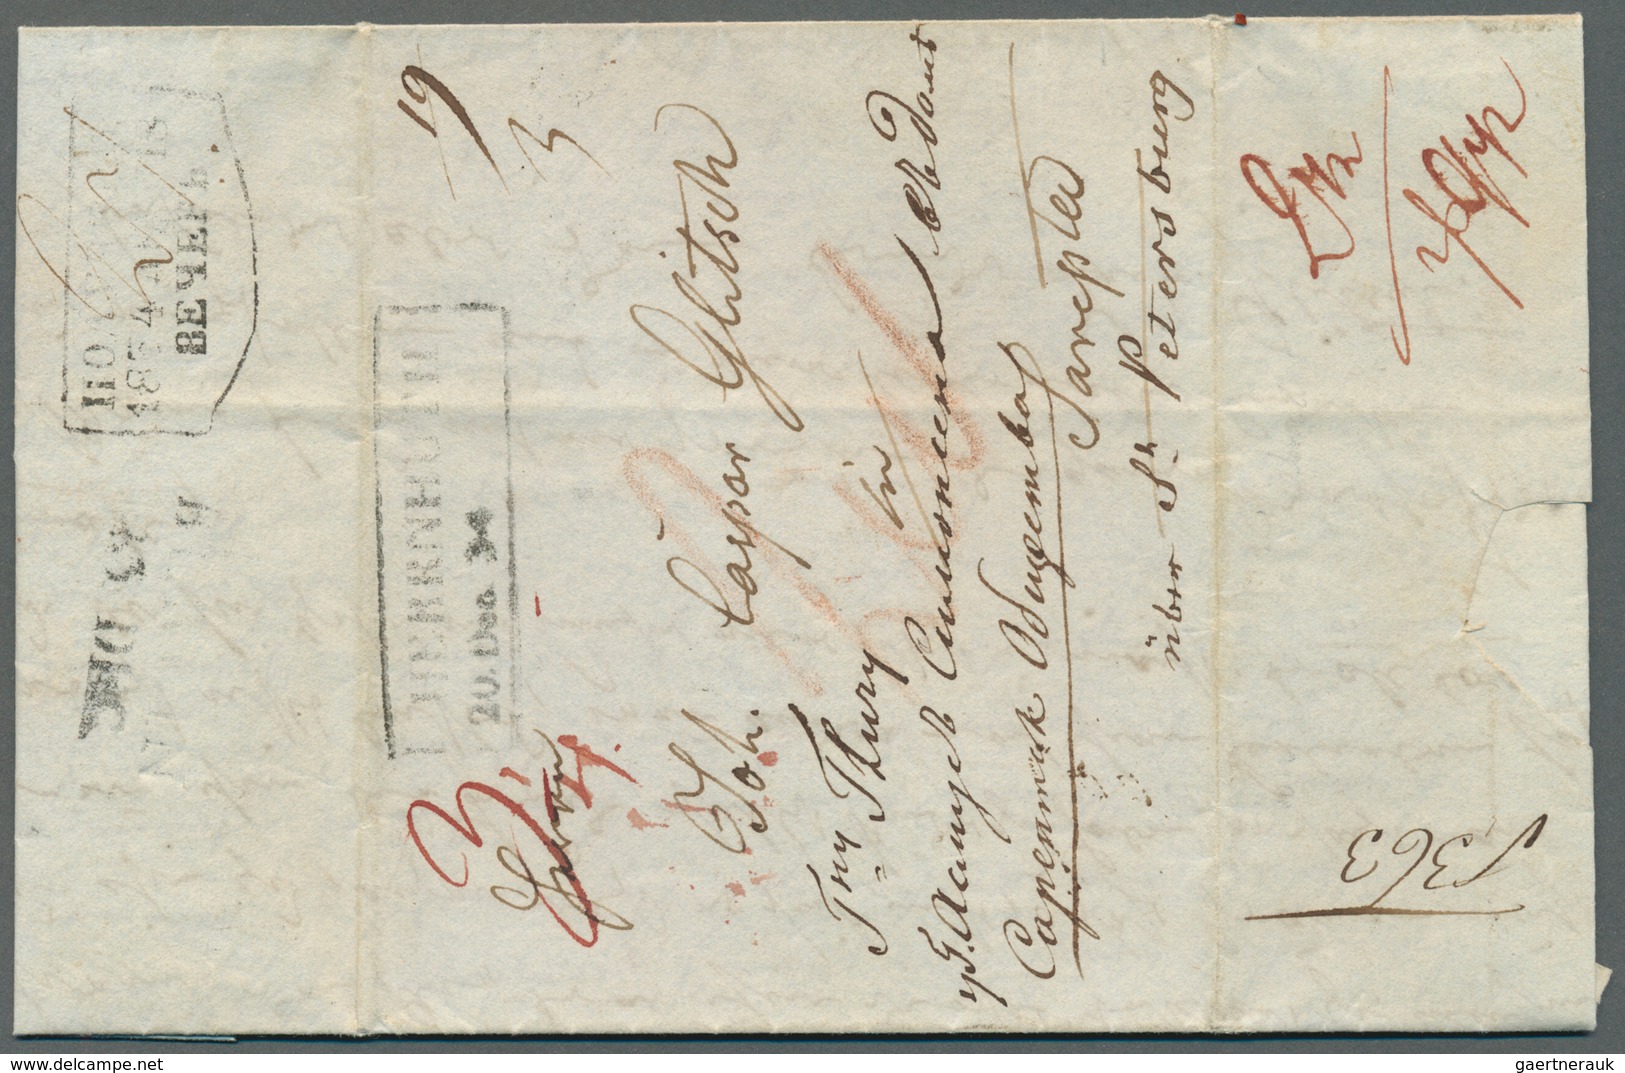 00504 Canada - Vorphilatelie: 1834 (21 Aug) Missionary Letter From Hoffenthal (today Hopedale), Labrador, - ...-1851 Voorfilatelie